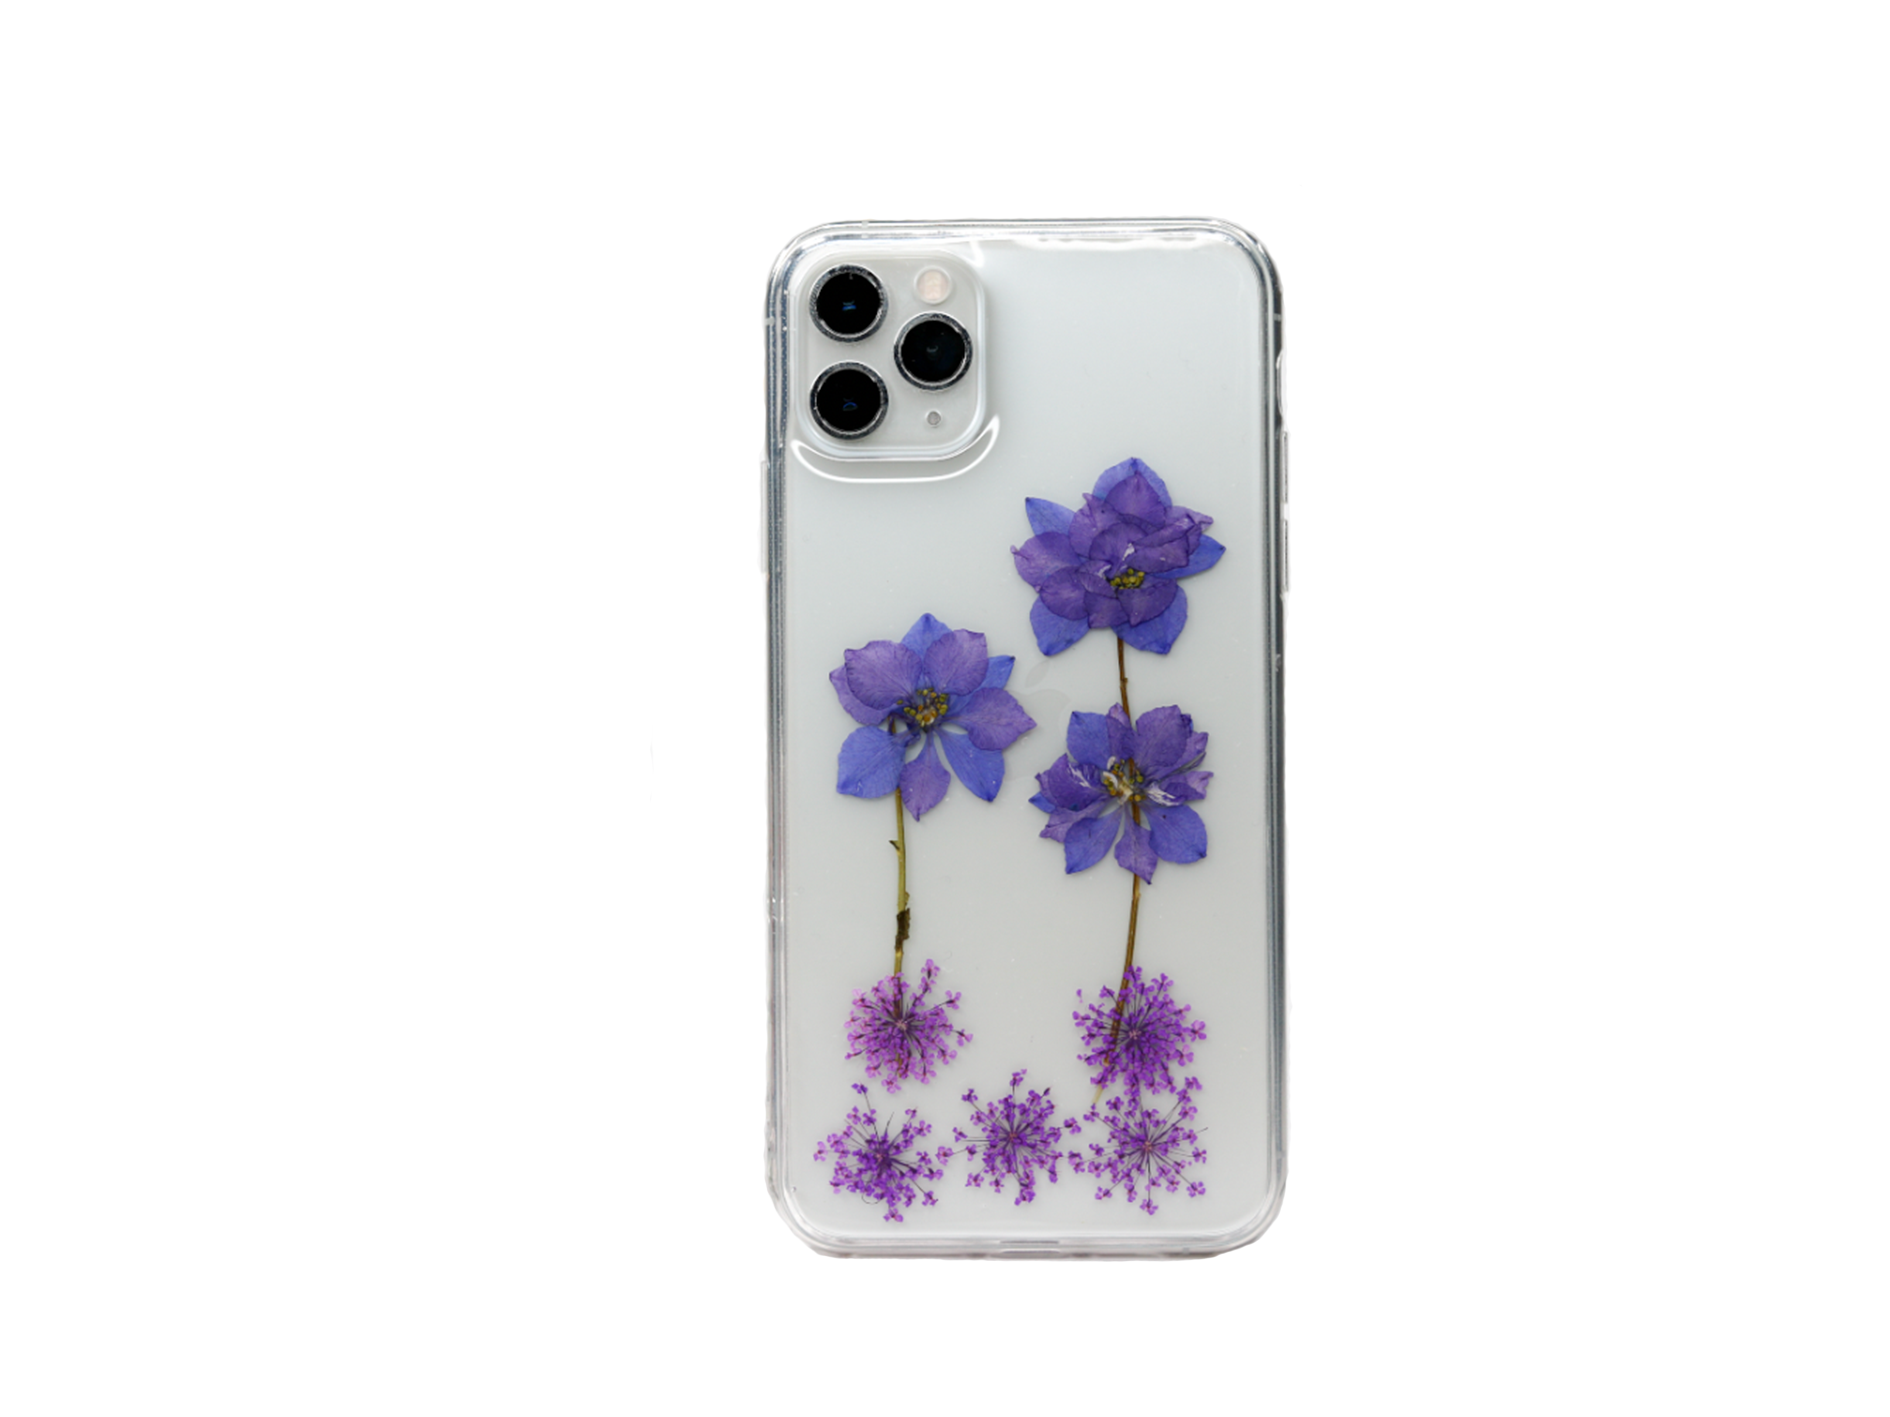  Real Pressed Purple Flowers Phone Case, Violets , Samsung Galaxy S10 S9 S8 S7, iphone case, iphone 6 6s 7 8 plus x xr xs 11 12 13 pro max case